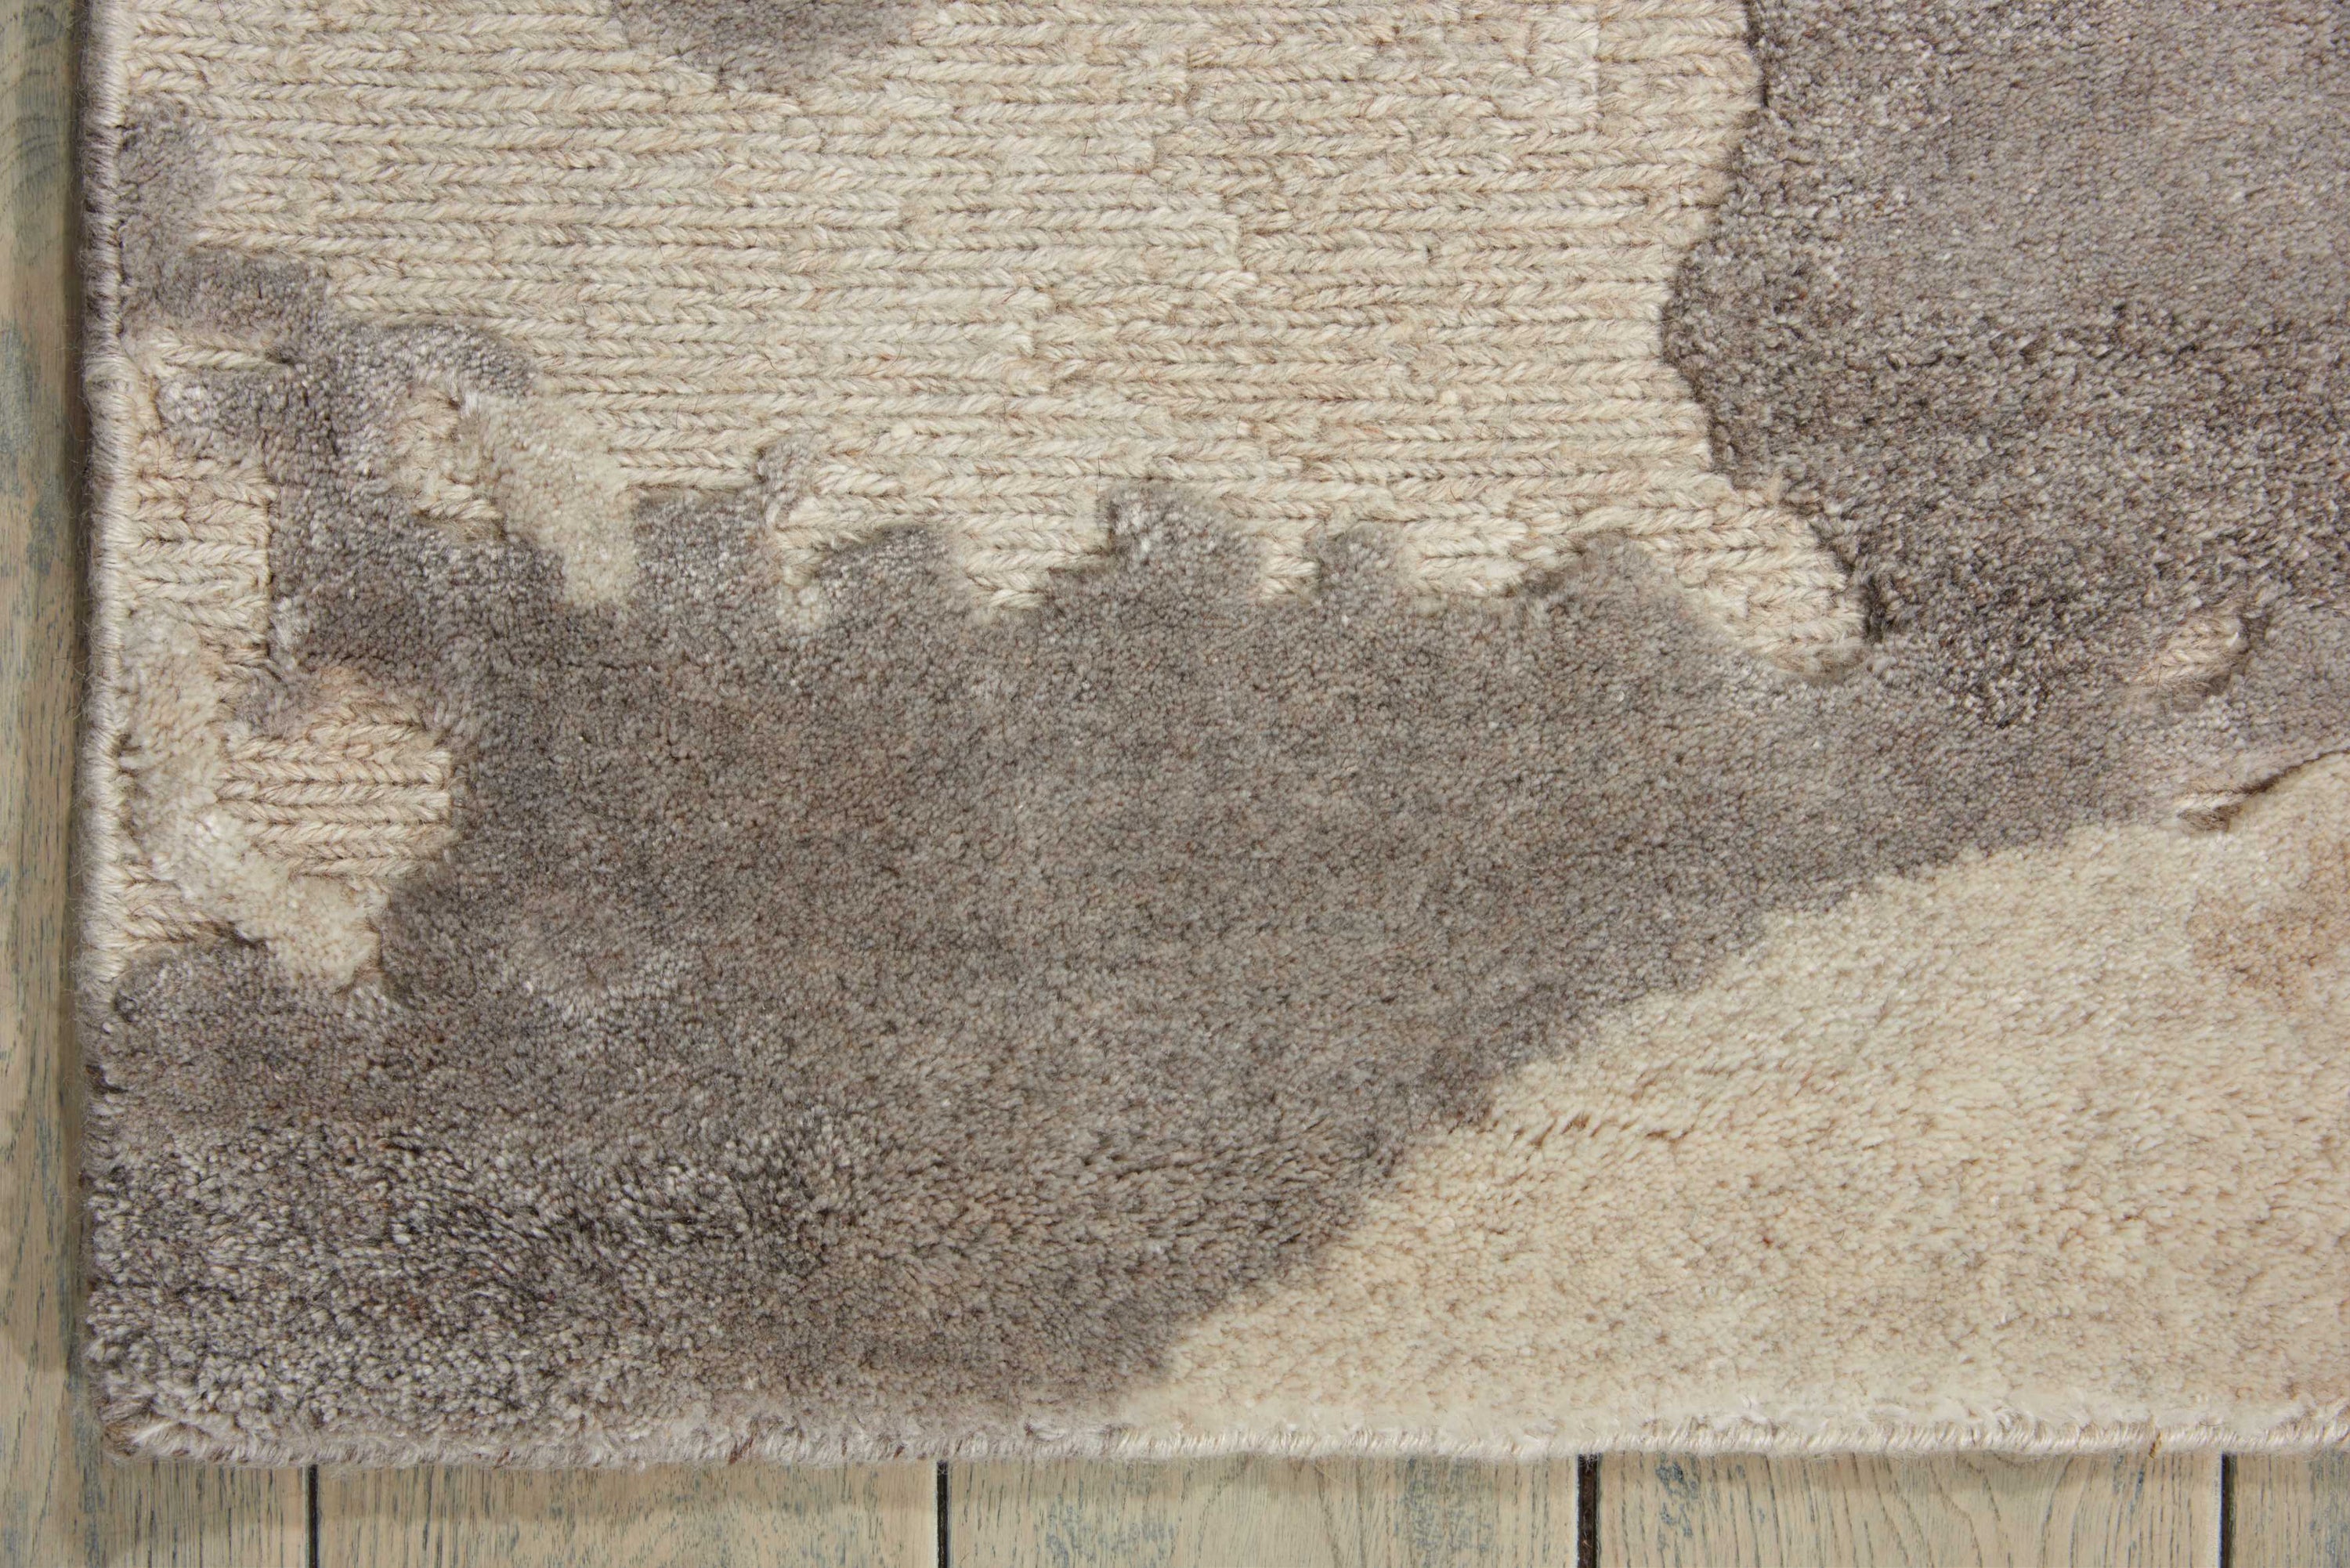 Close-up view of a worn rug with discoloration and textures.